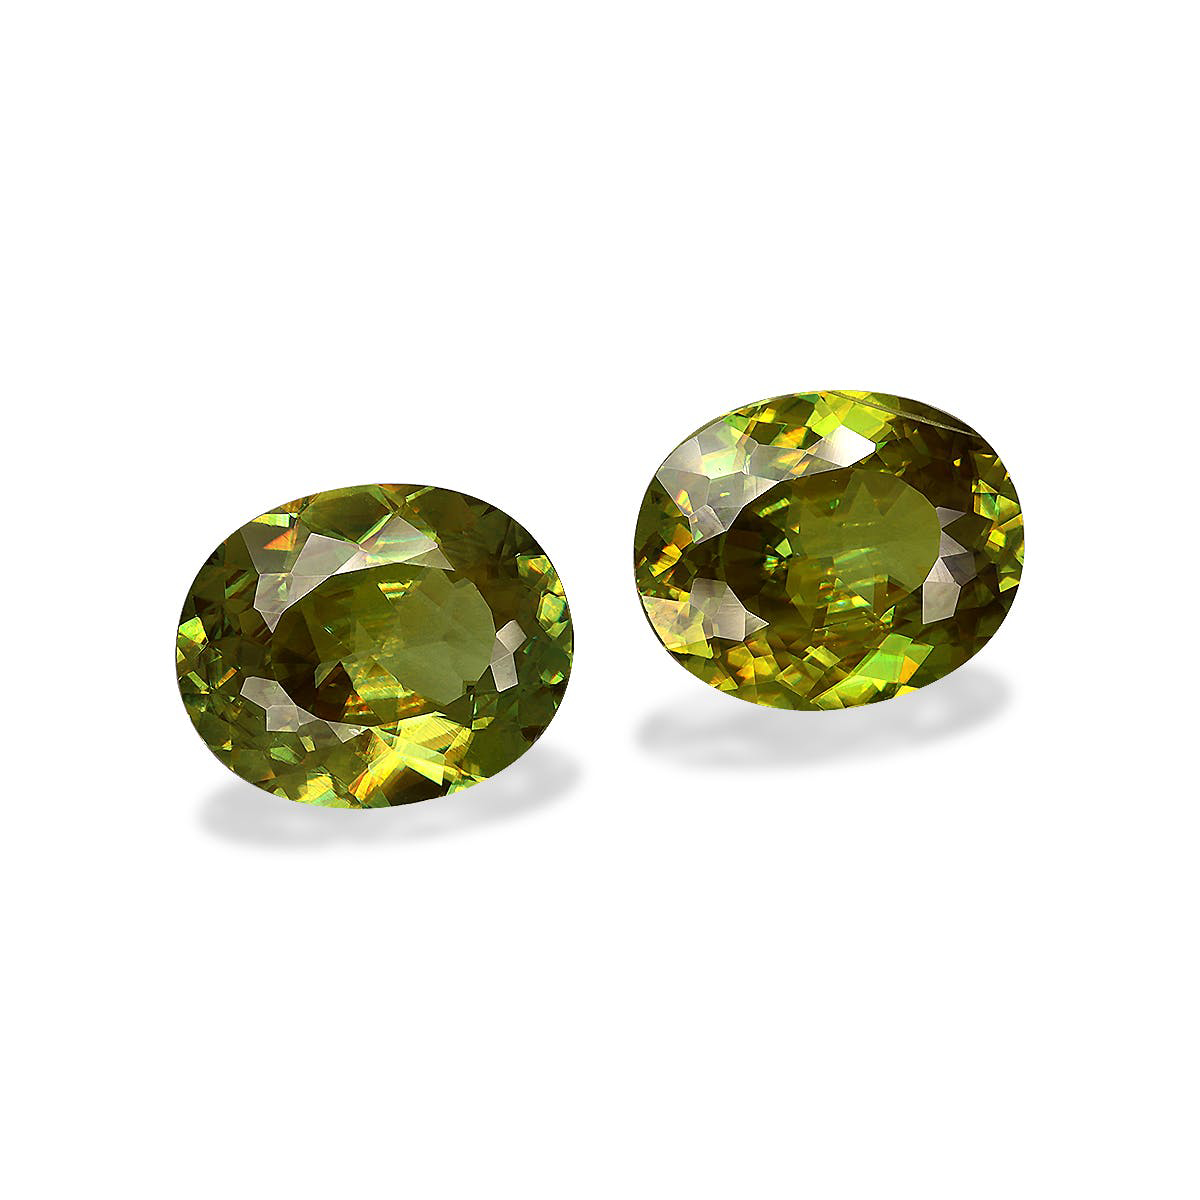 Picture of Lime Green Sphene 9.12ct - 12x10mm Pair (SH1085)